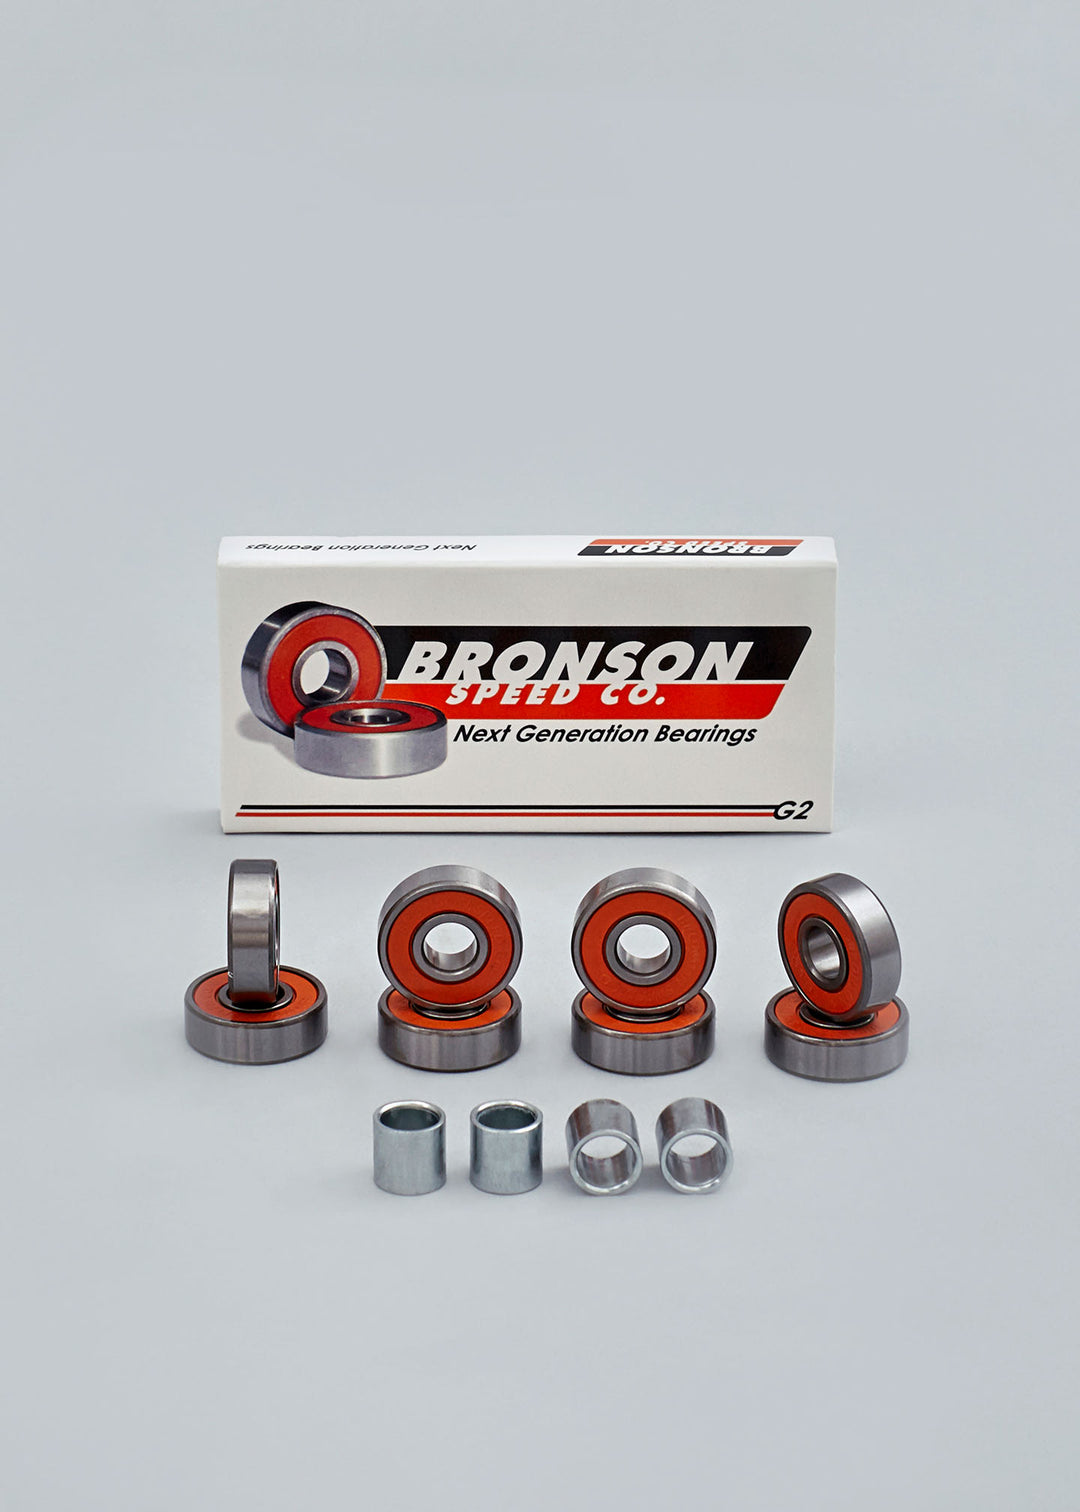 Bronson Speed Co. G2 Bearings - no comply online skateshop